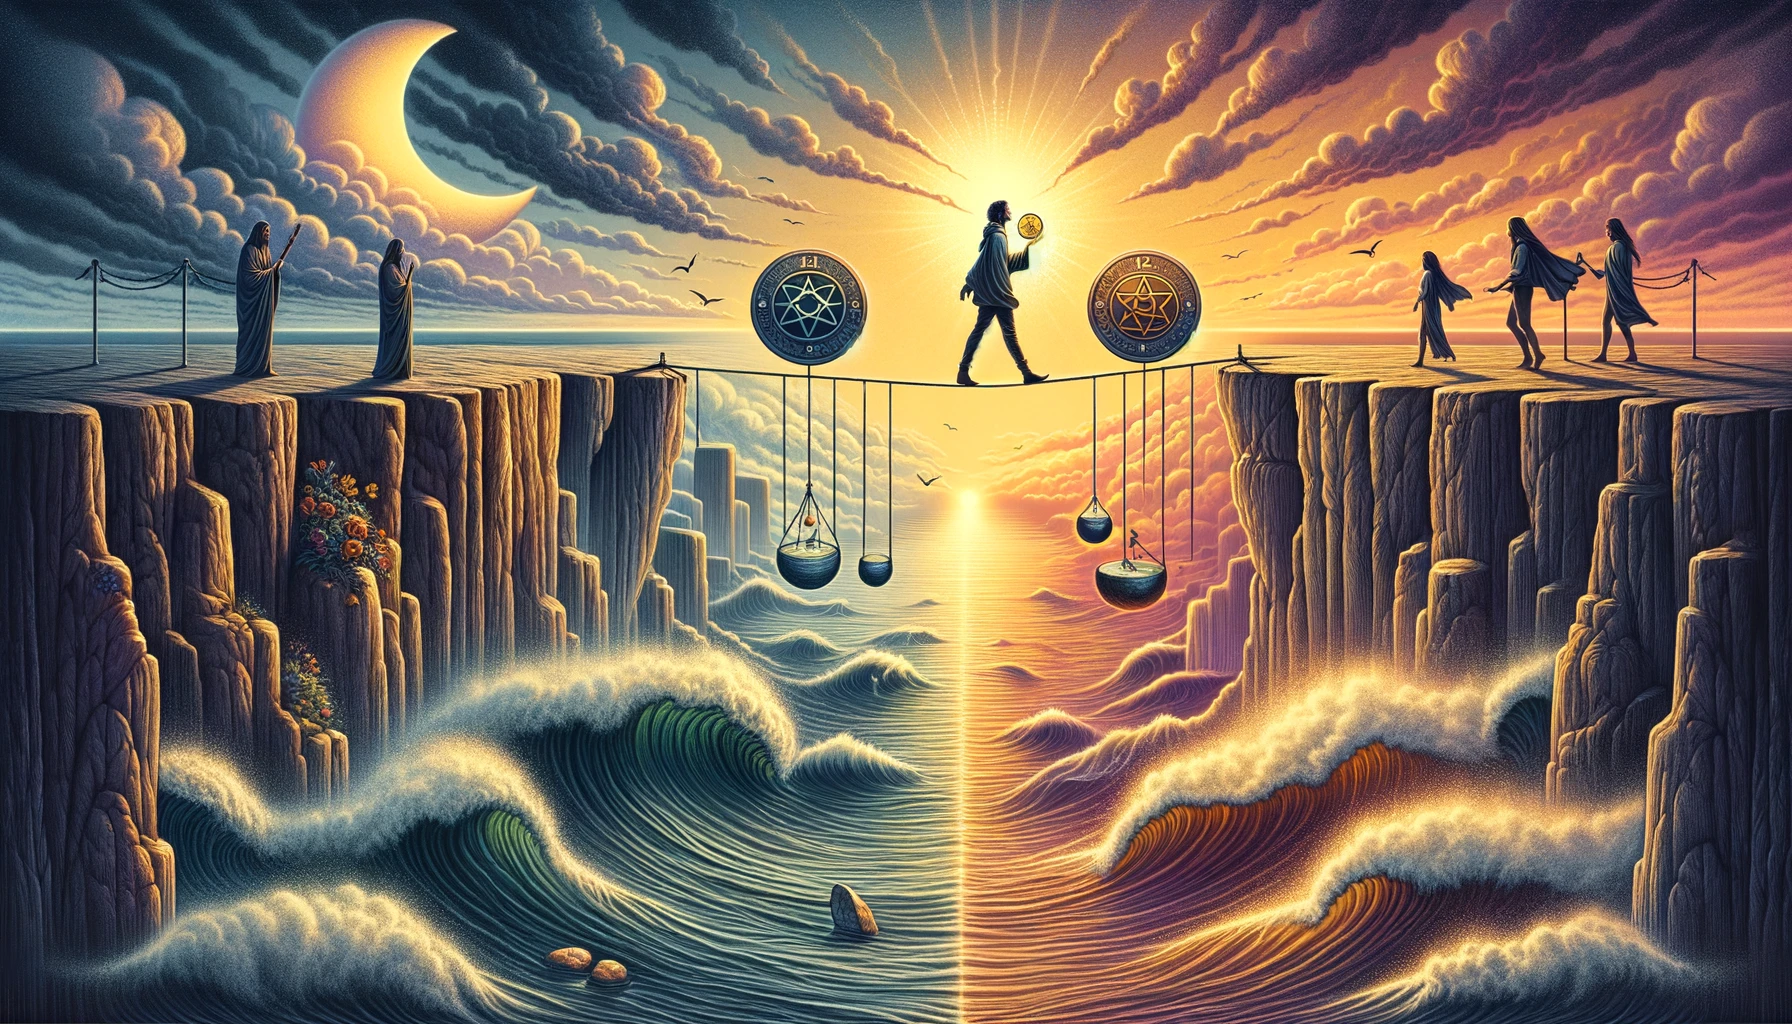 An illustration showing a character walking a tightrope between cliffs, with each hand holding a pentacle representing different emotional states. The scene vividly portrays the balancing act of fluctuating emotions and the complexity of managing feelings, echoing the themes of the Two of Pentacles card.